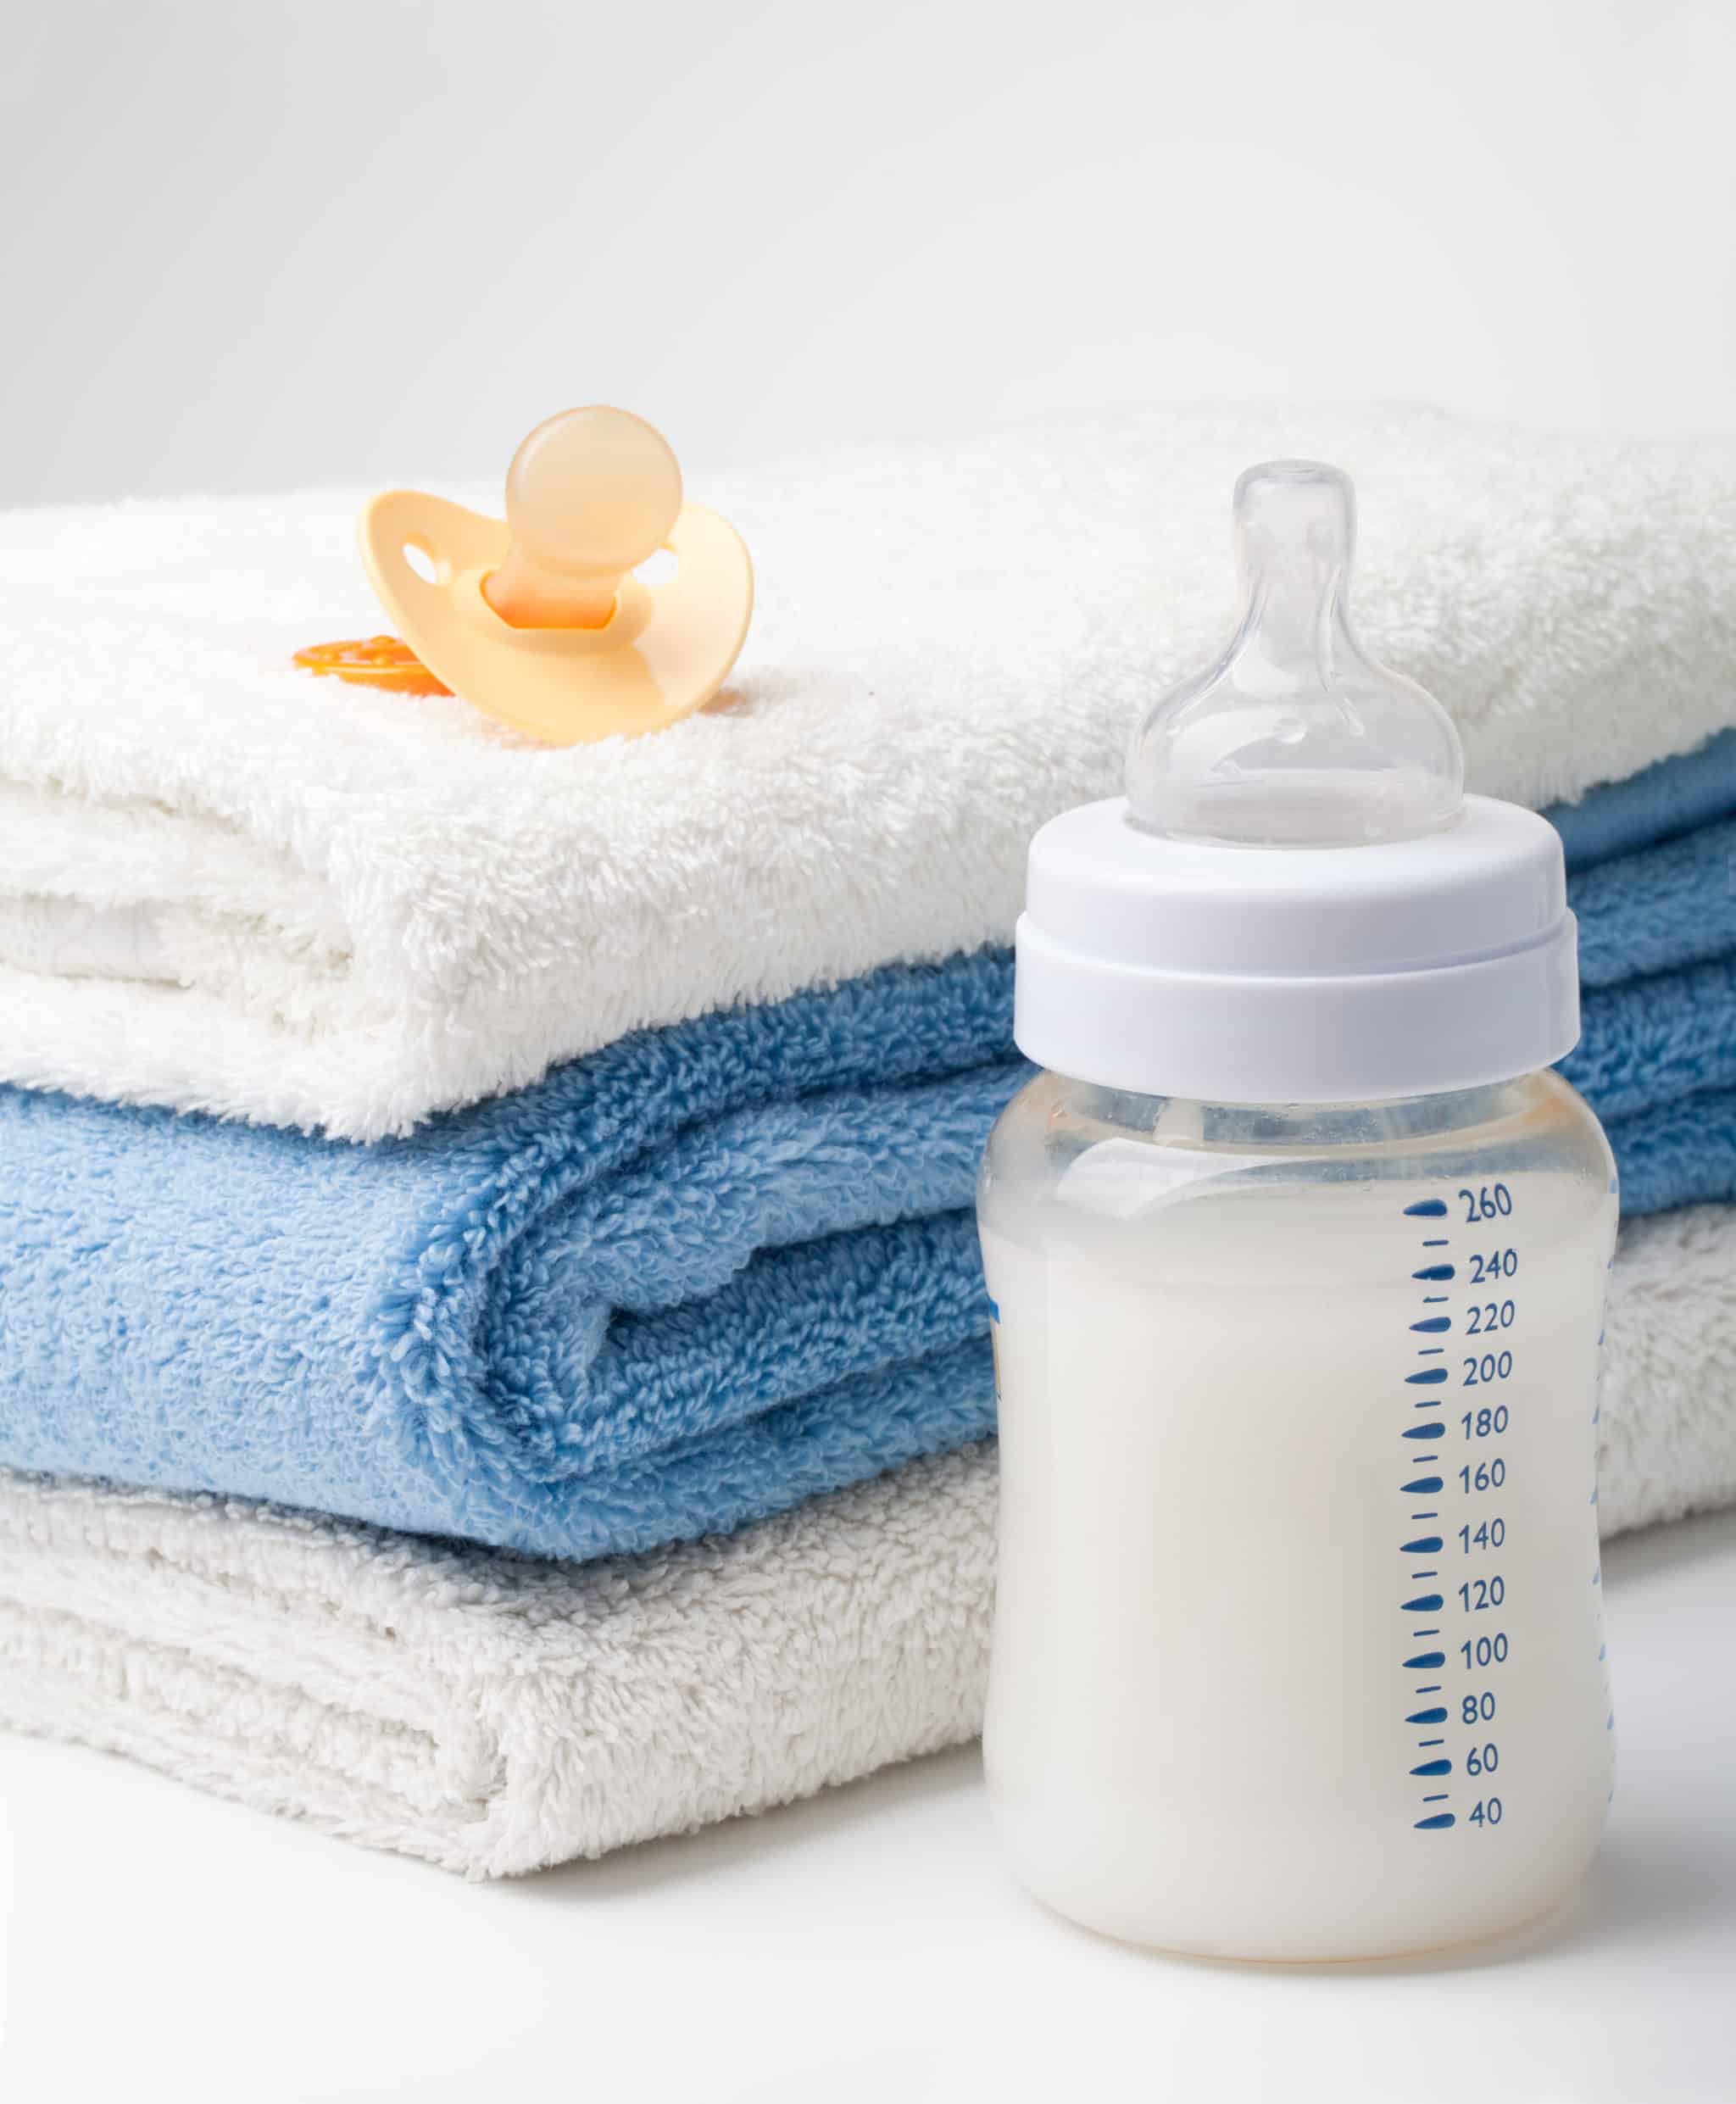 stack of towel with a baby bottle